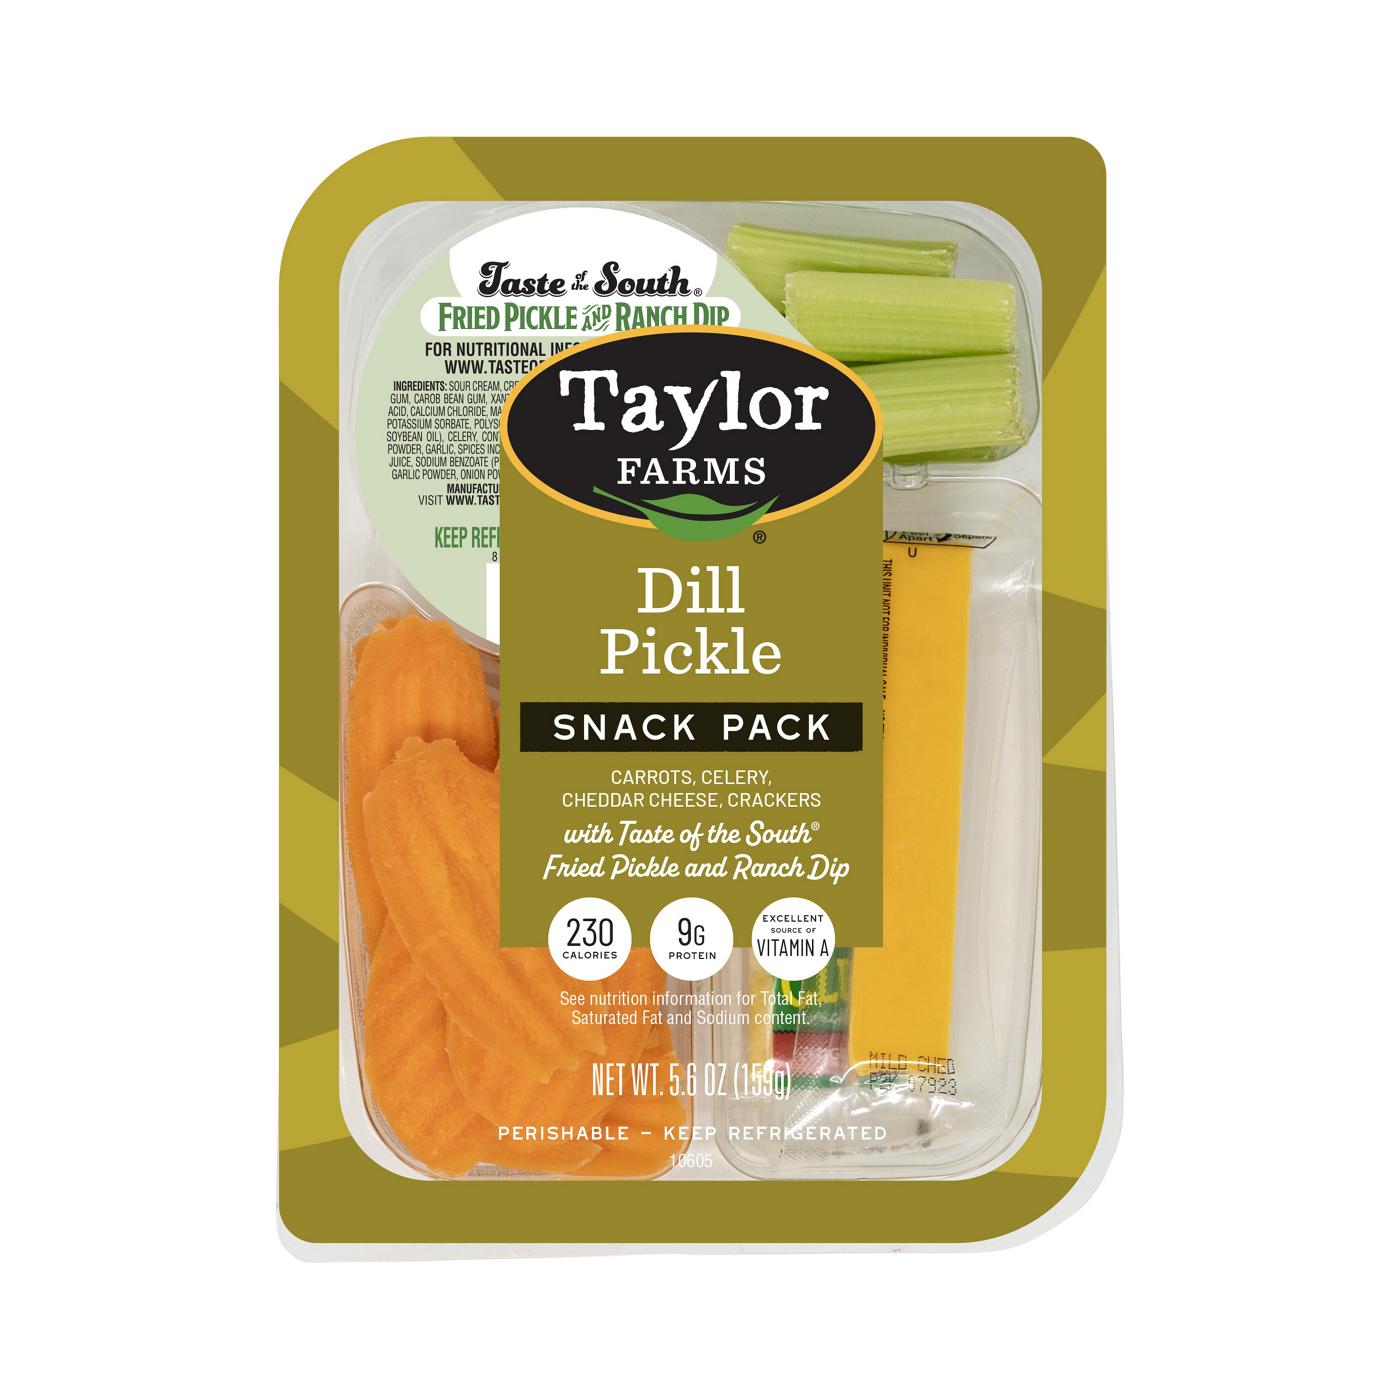 Taylor Farms Dill Pickle Snack Pack; image 1 of 4